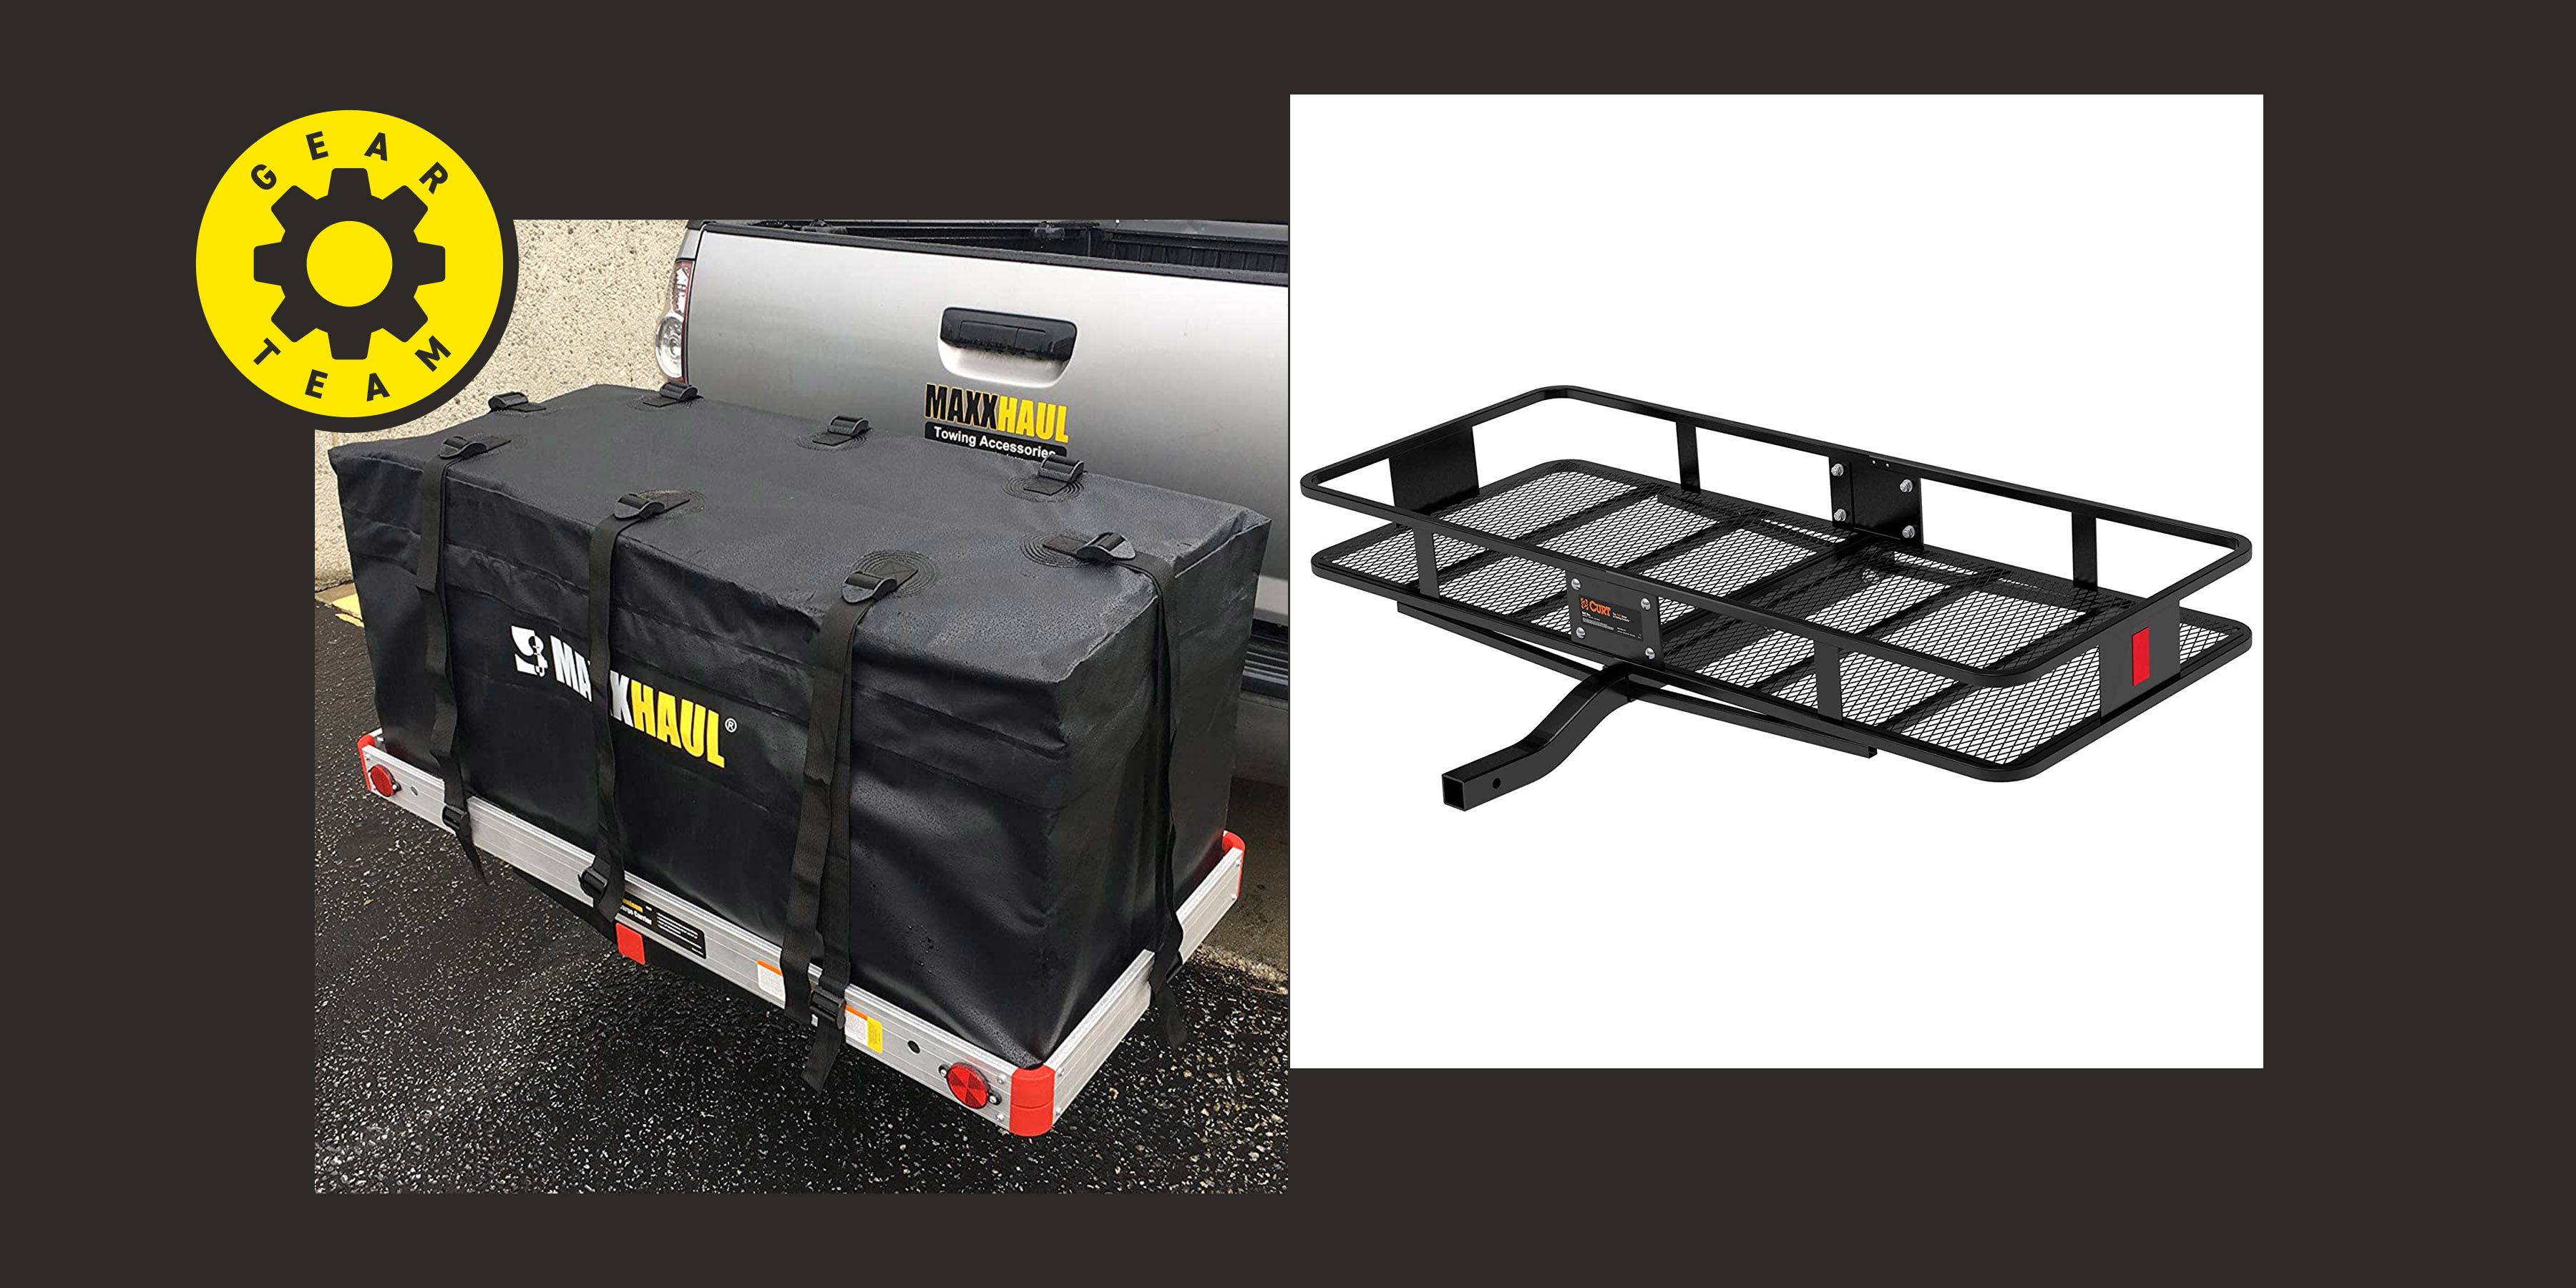 Rooftop Cargo Carrier 21 Cubic Feet Soft Car Roof Top Luggage Bag for All  Vehicles SUV withWithout Racks 85 Free for USA Interested DM for  Details  rAMZreviewTrader